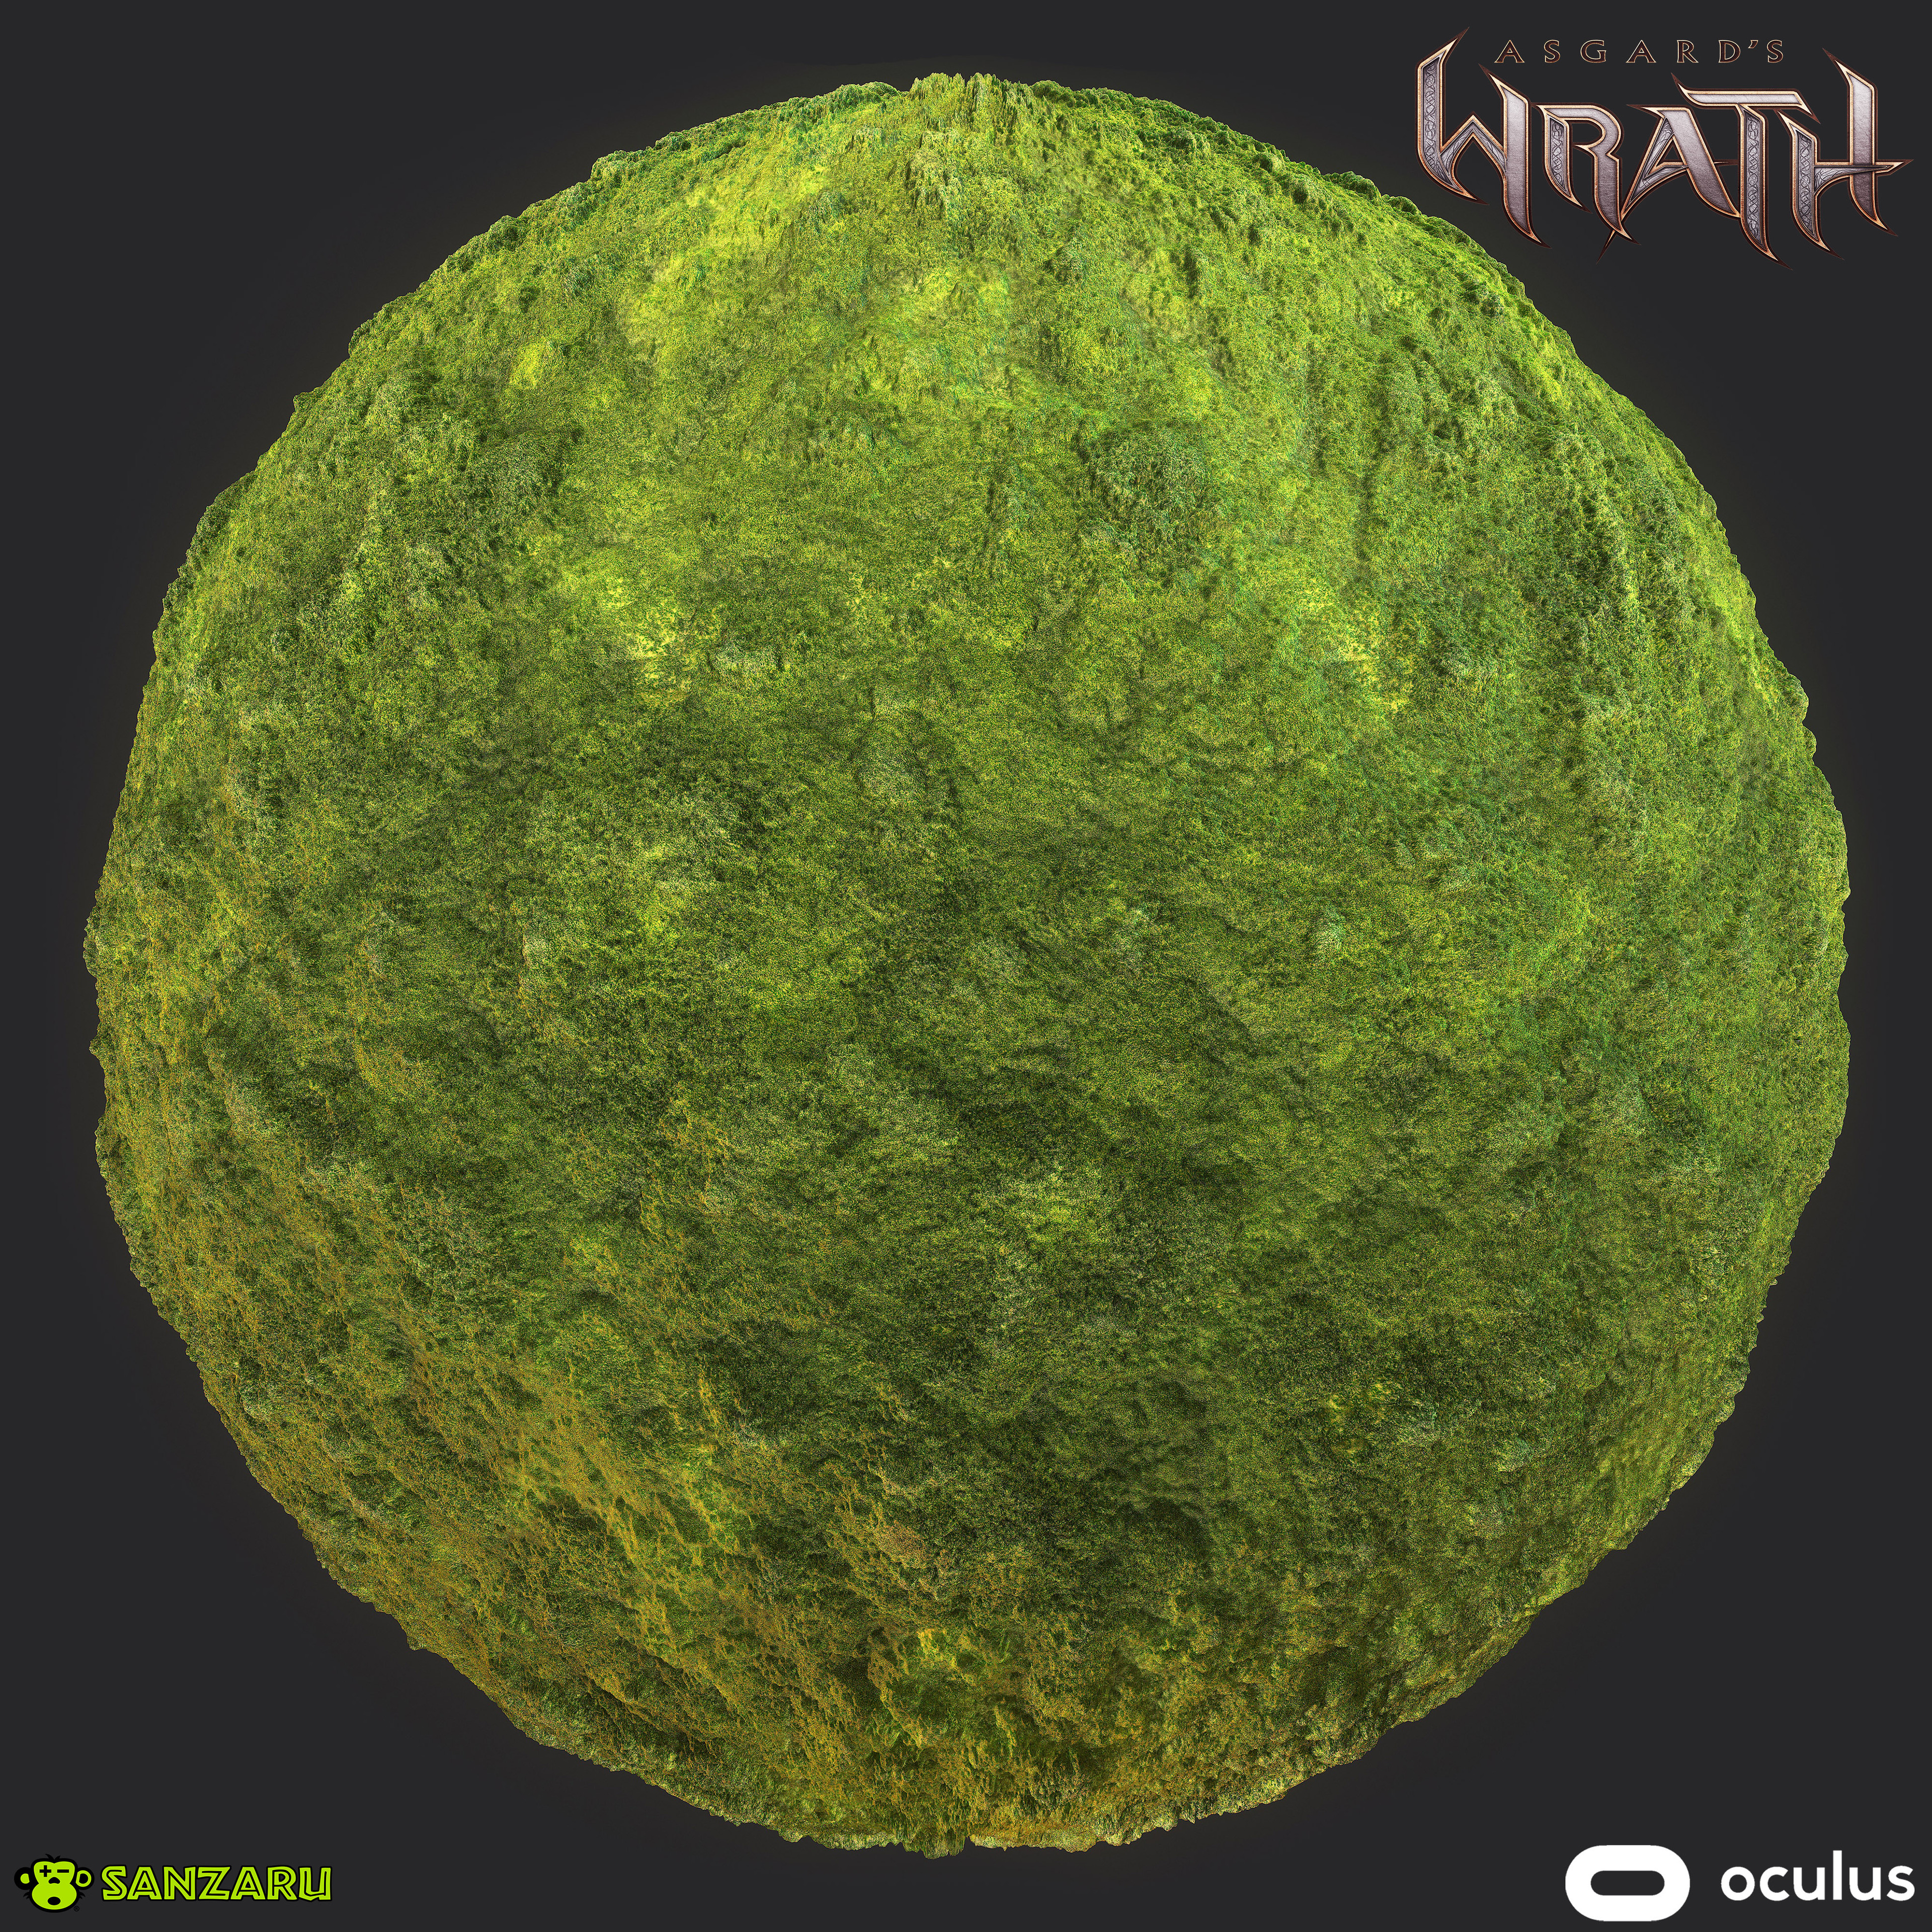 Jotunheim Moss- One of the various Jotunheim material variations of the game. Used in various sections of the Valley of Giants Saga.